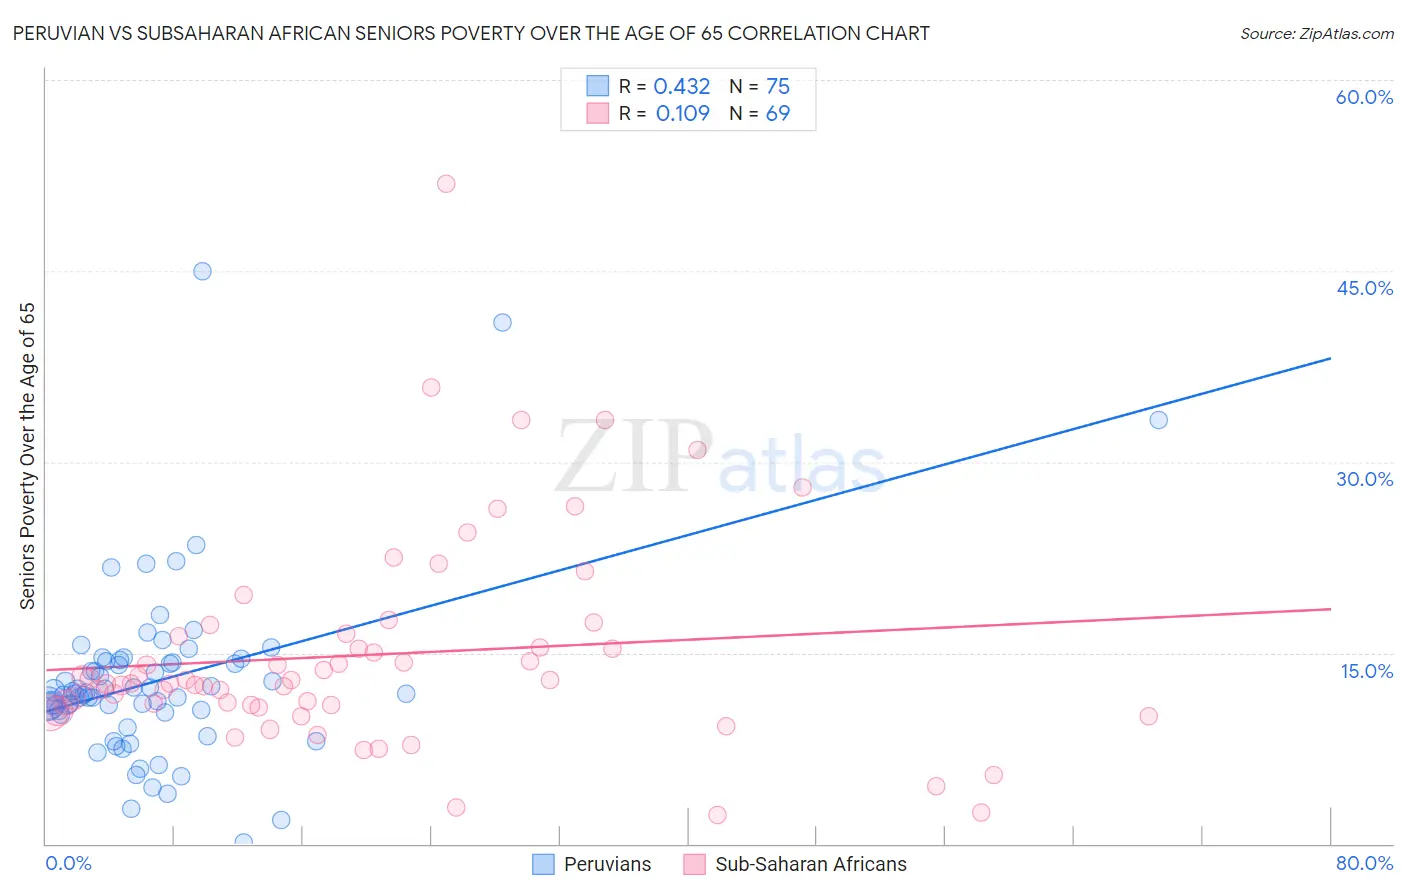 Peruvian vs Subsaharan African Seniors Poverty Over the Age of 65